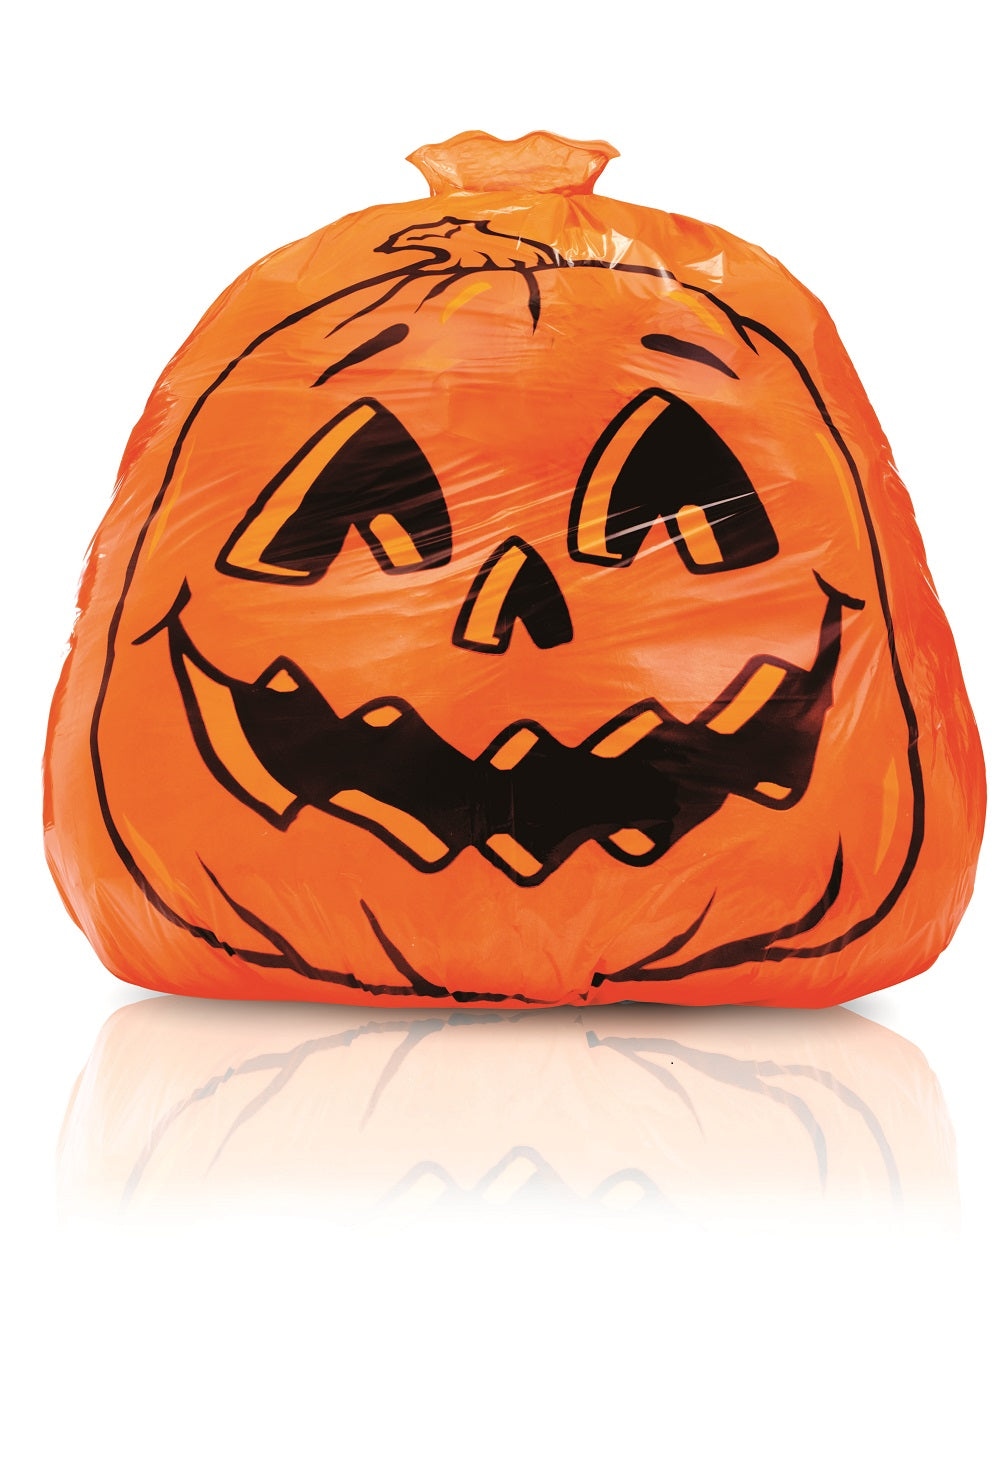 buy pumpkin , carving tool & halloween at cheap rate in bulk. wholesale & retail decoration & holiday gift items store.